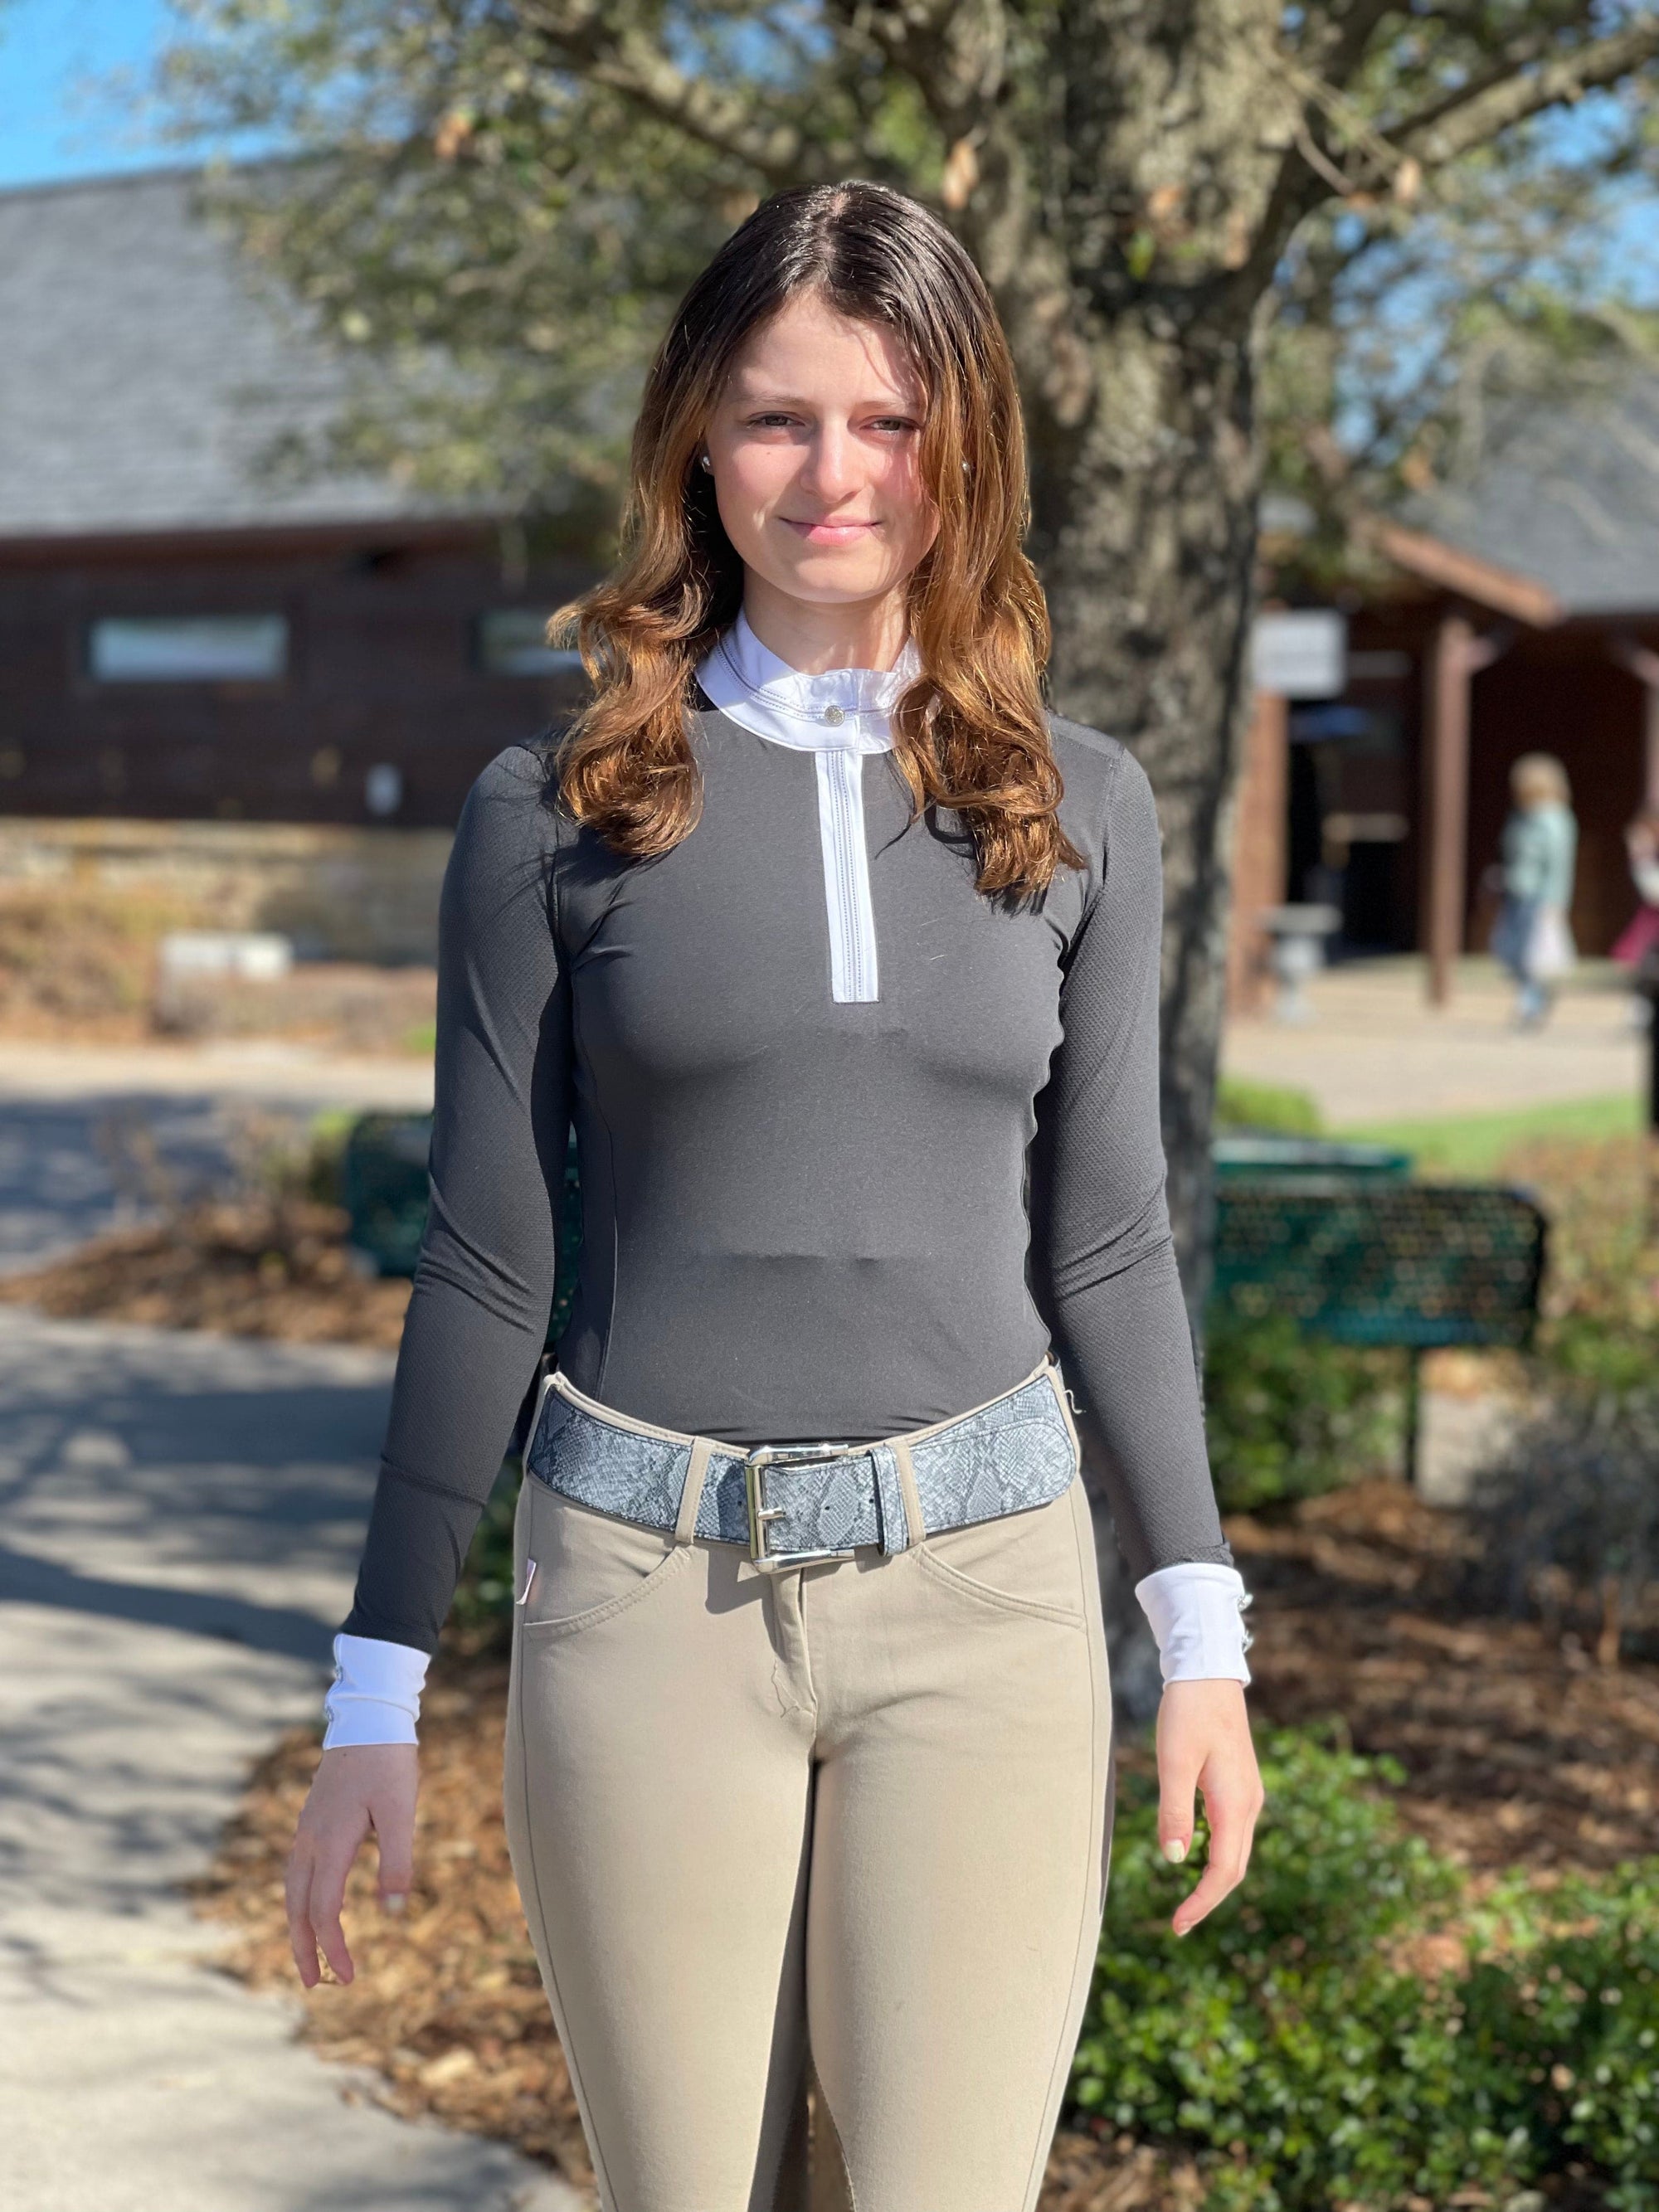 Chestnut Bay Show Shirt Chestnut Bay- SkyCool Show Shirt LS equestrian team apparel online tack store mobile tack store custom farm apparel custom show stable clothing equestrian lifestyle horse show clothing riding clothes horses equestrian tack store